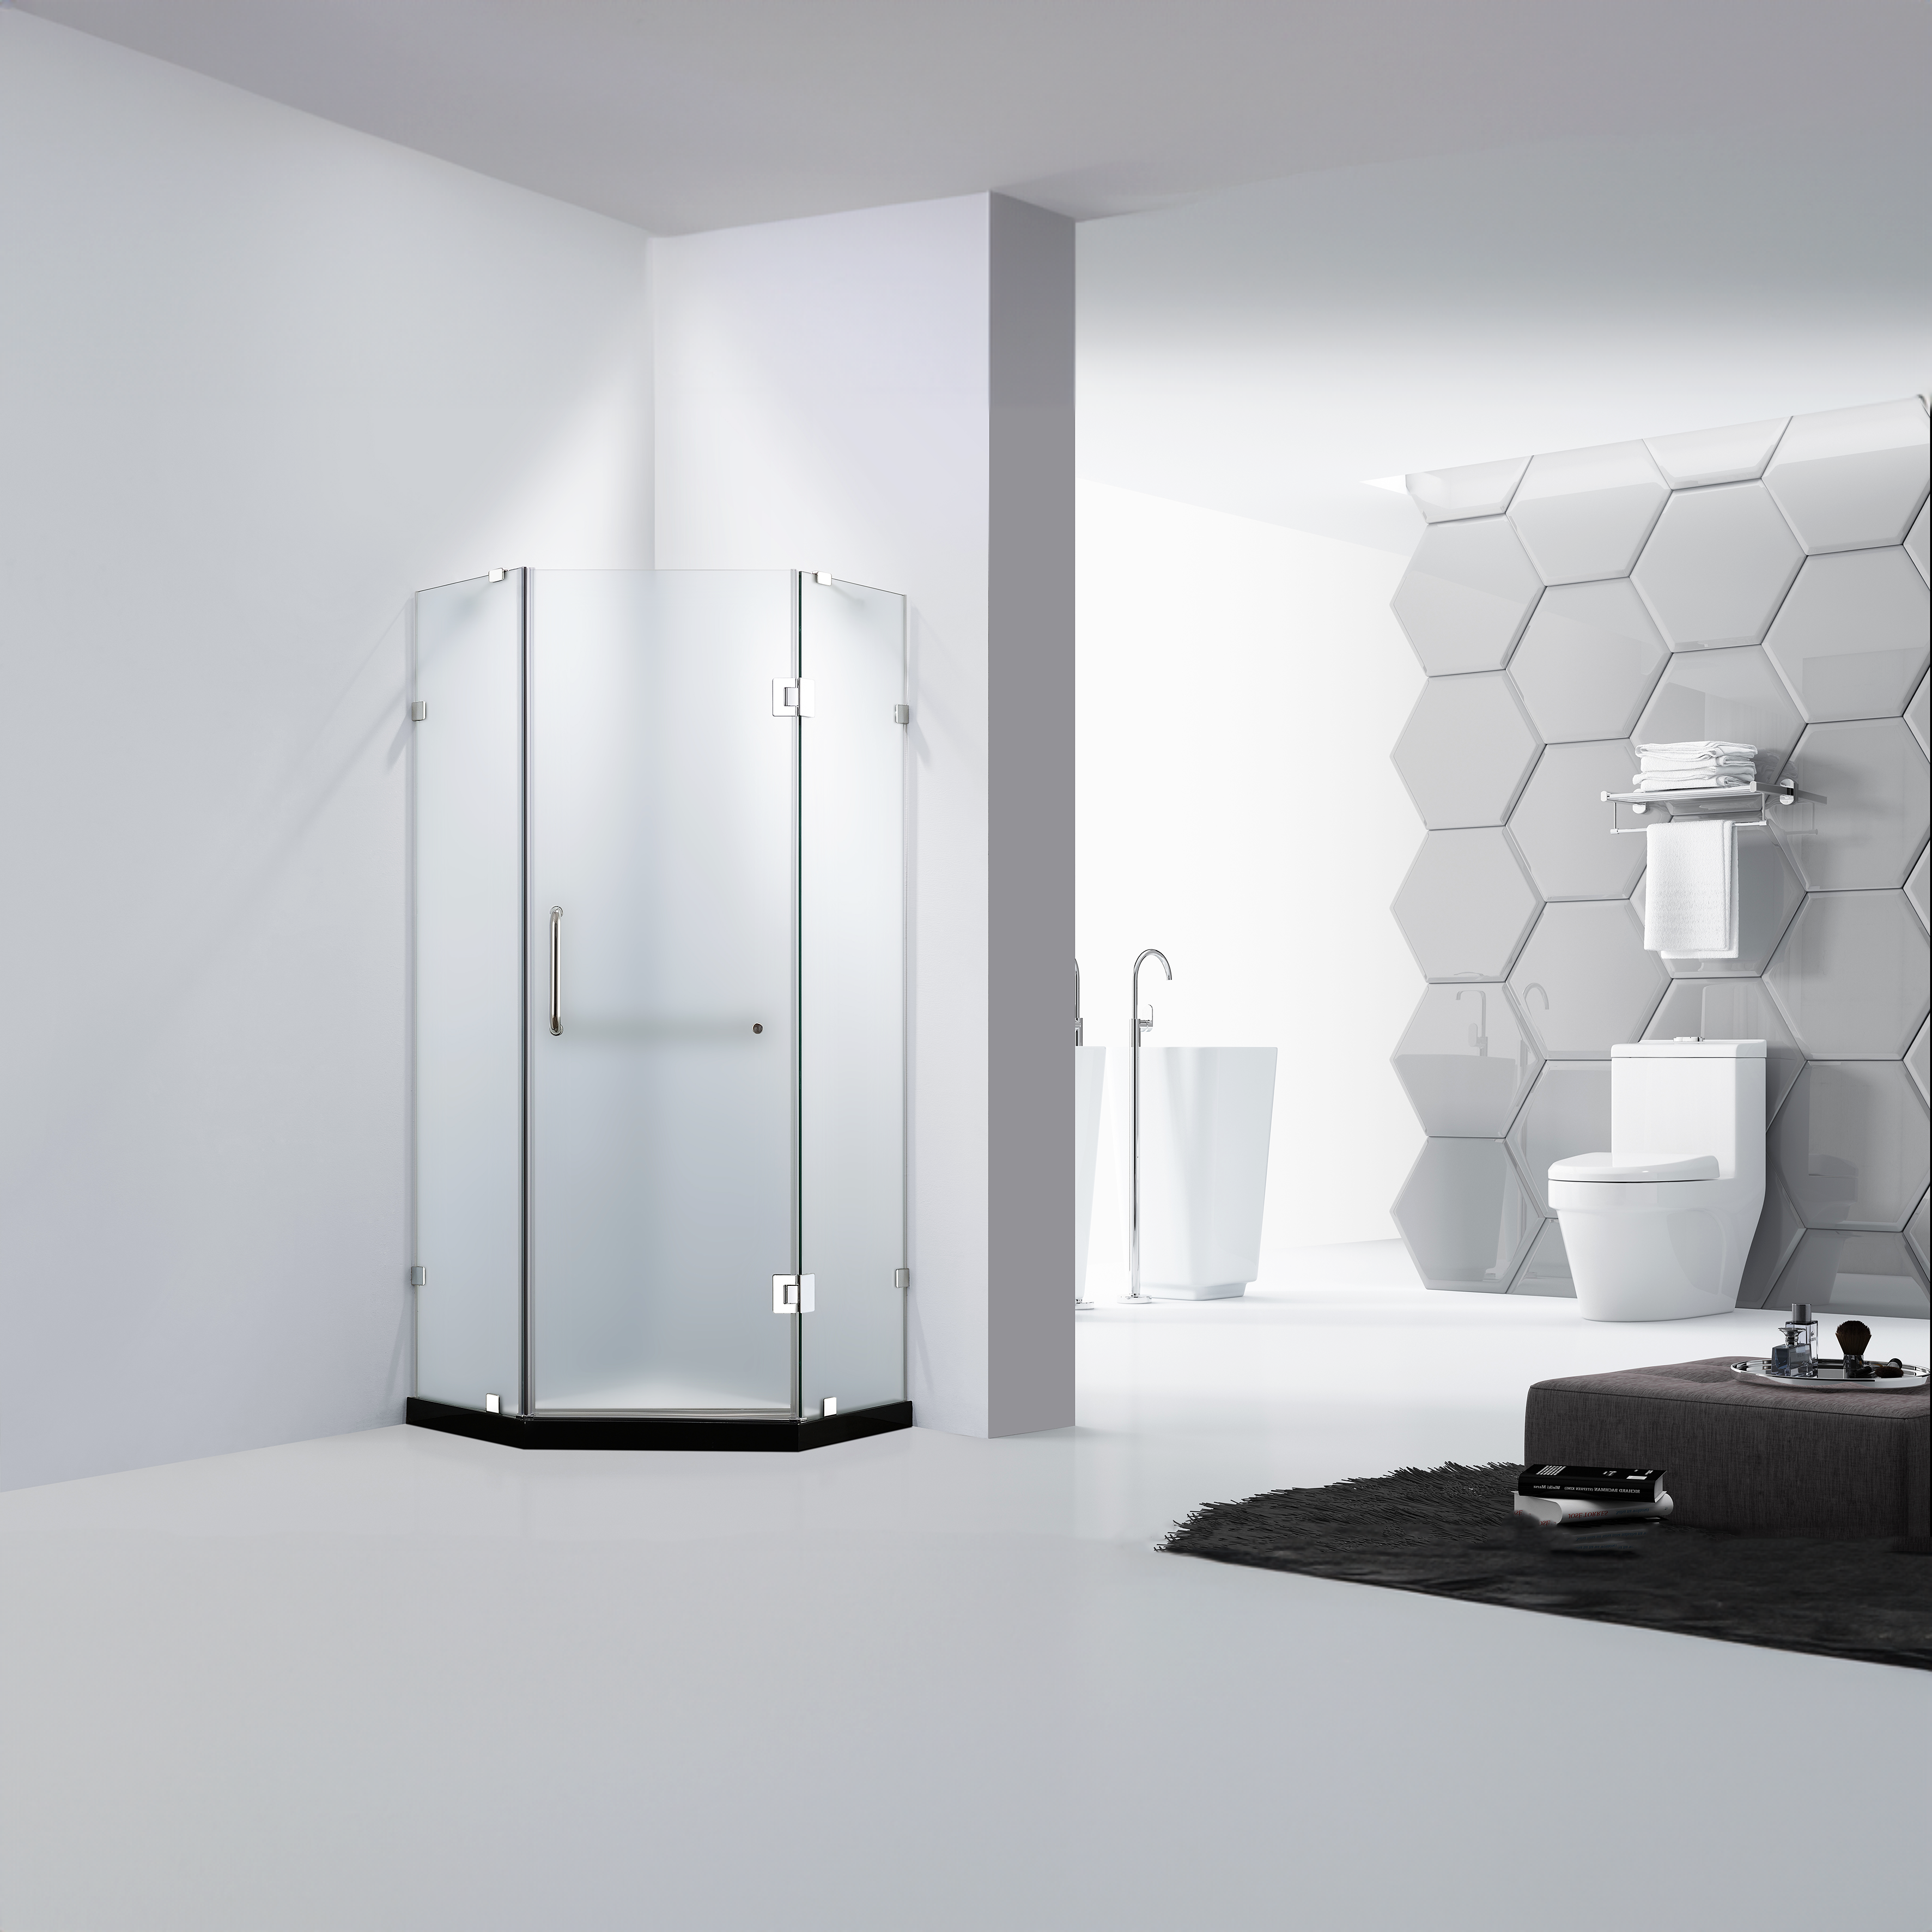 Dreamwerks 39.4"W x 79"H Frameless Neo-Angle Hinged Shower Door - Available in Clear or Frosted Glass